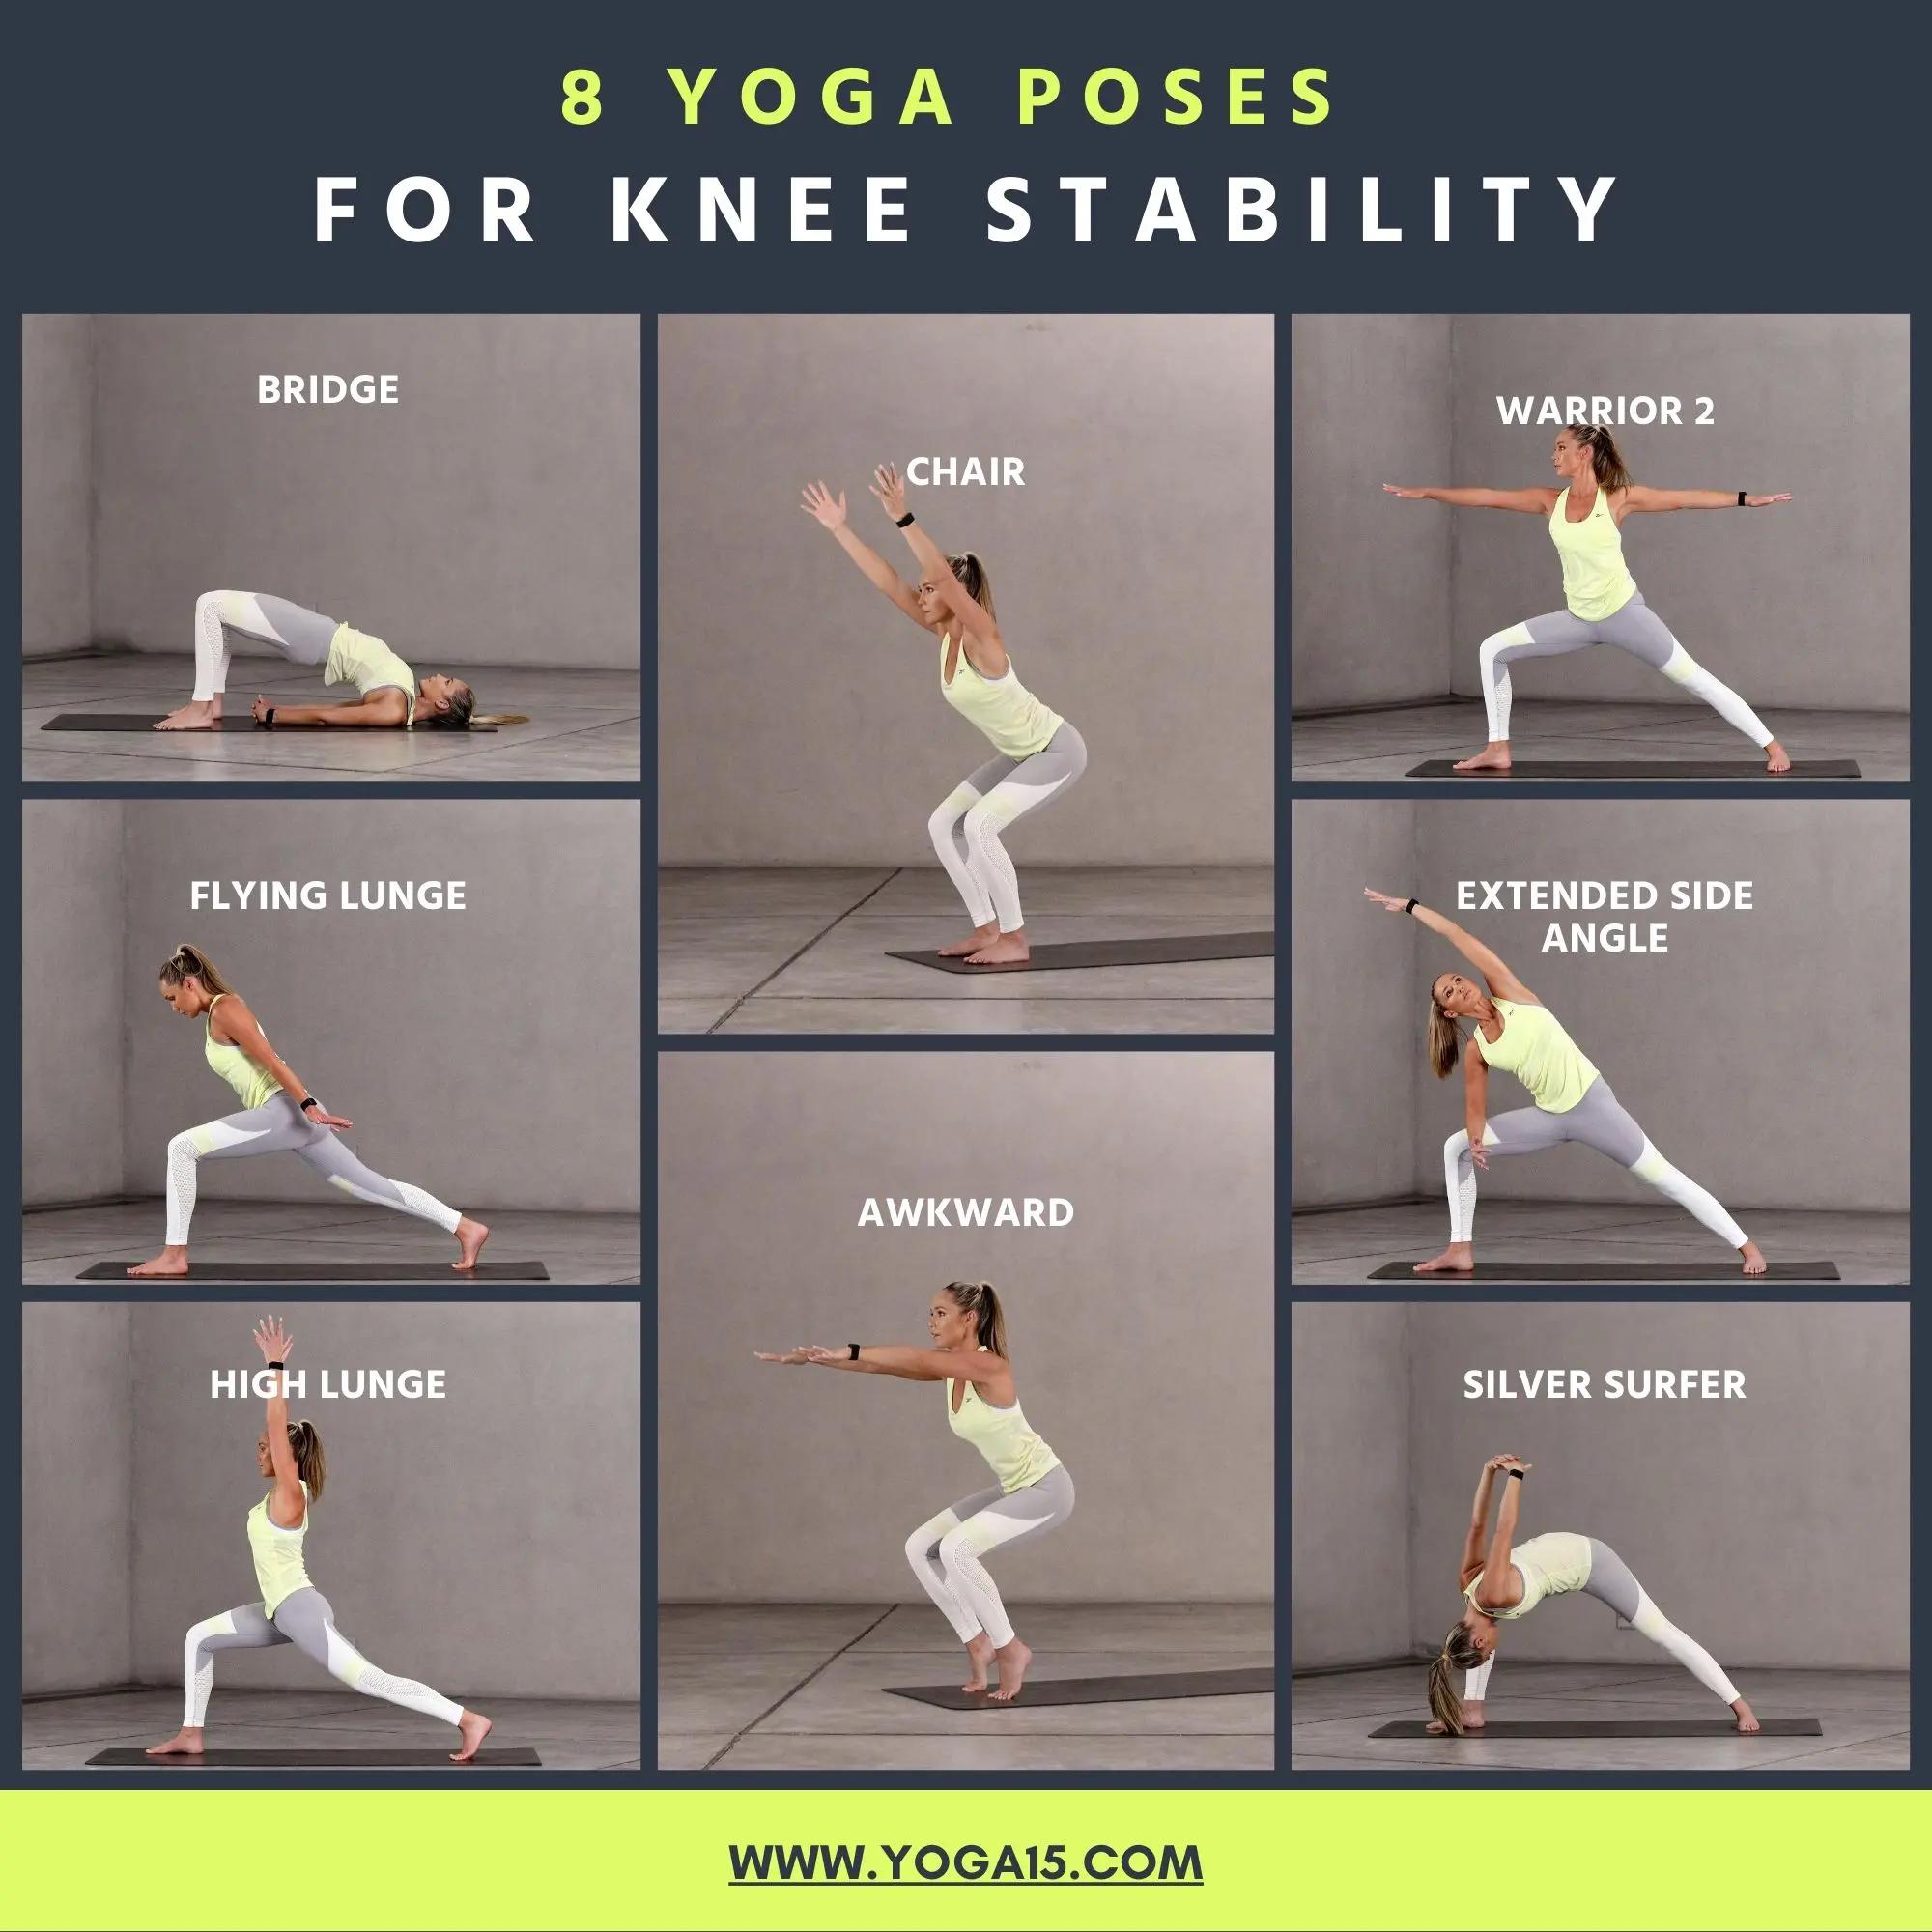 yoga poses on knees - What is kneeling pose called in yoga